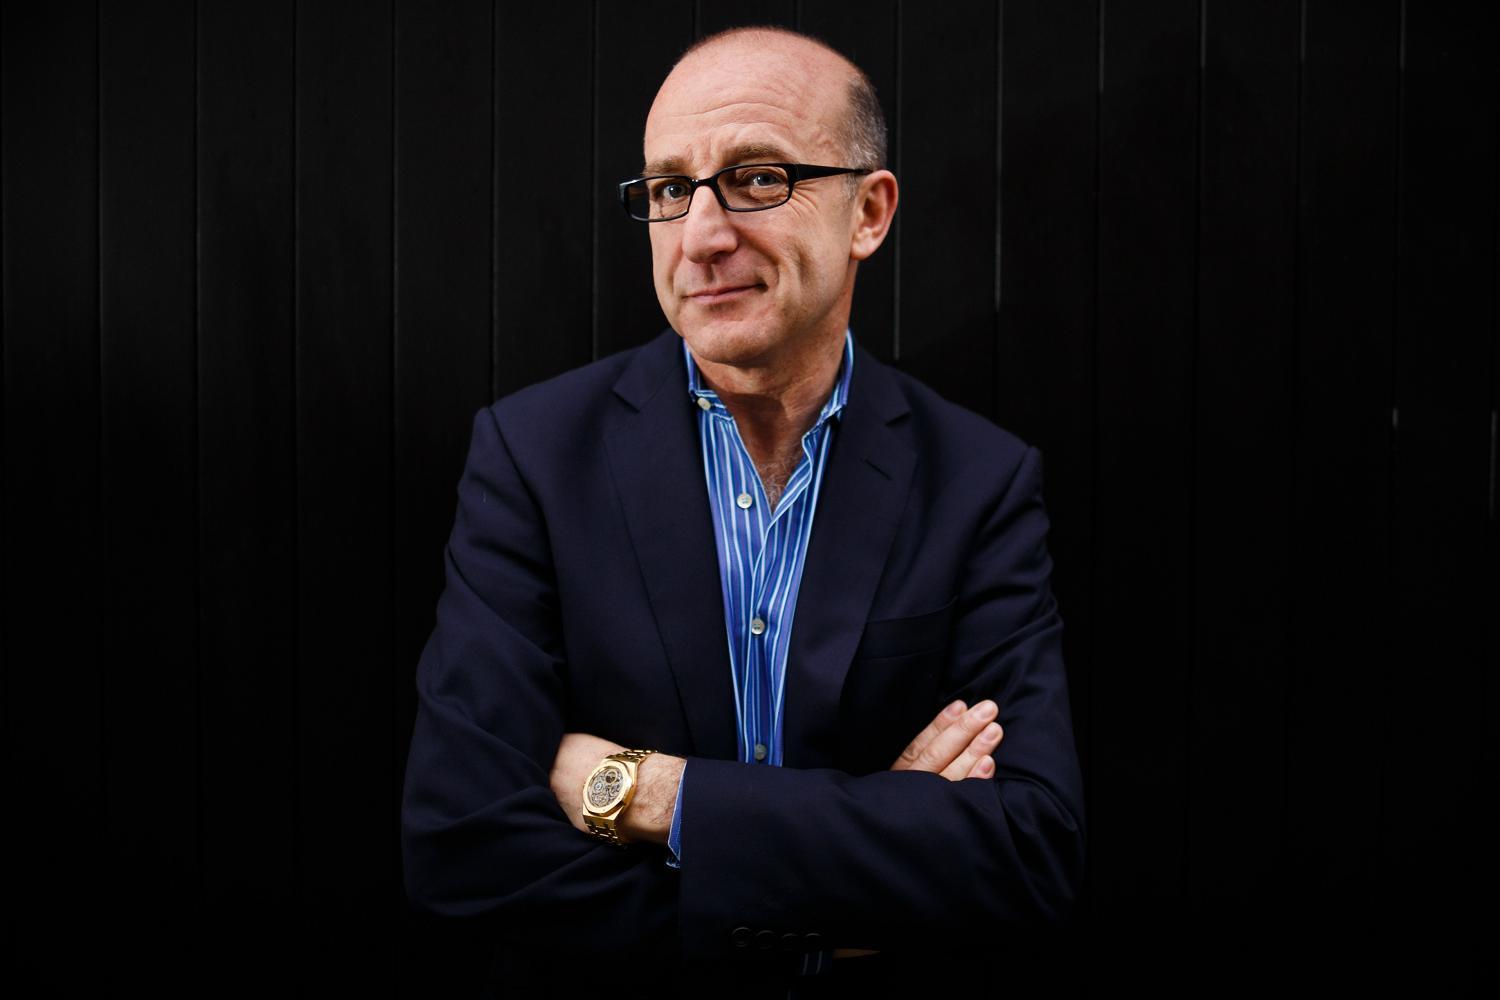 Paul McKenna wearing a black suit and blue polo